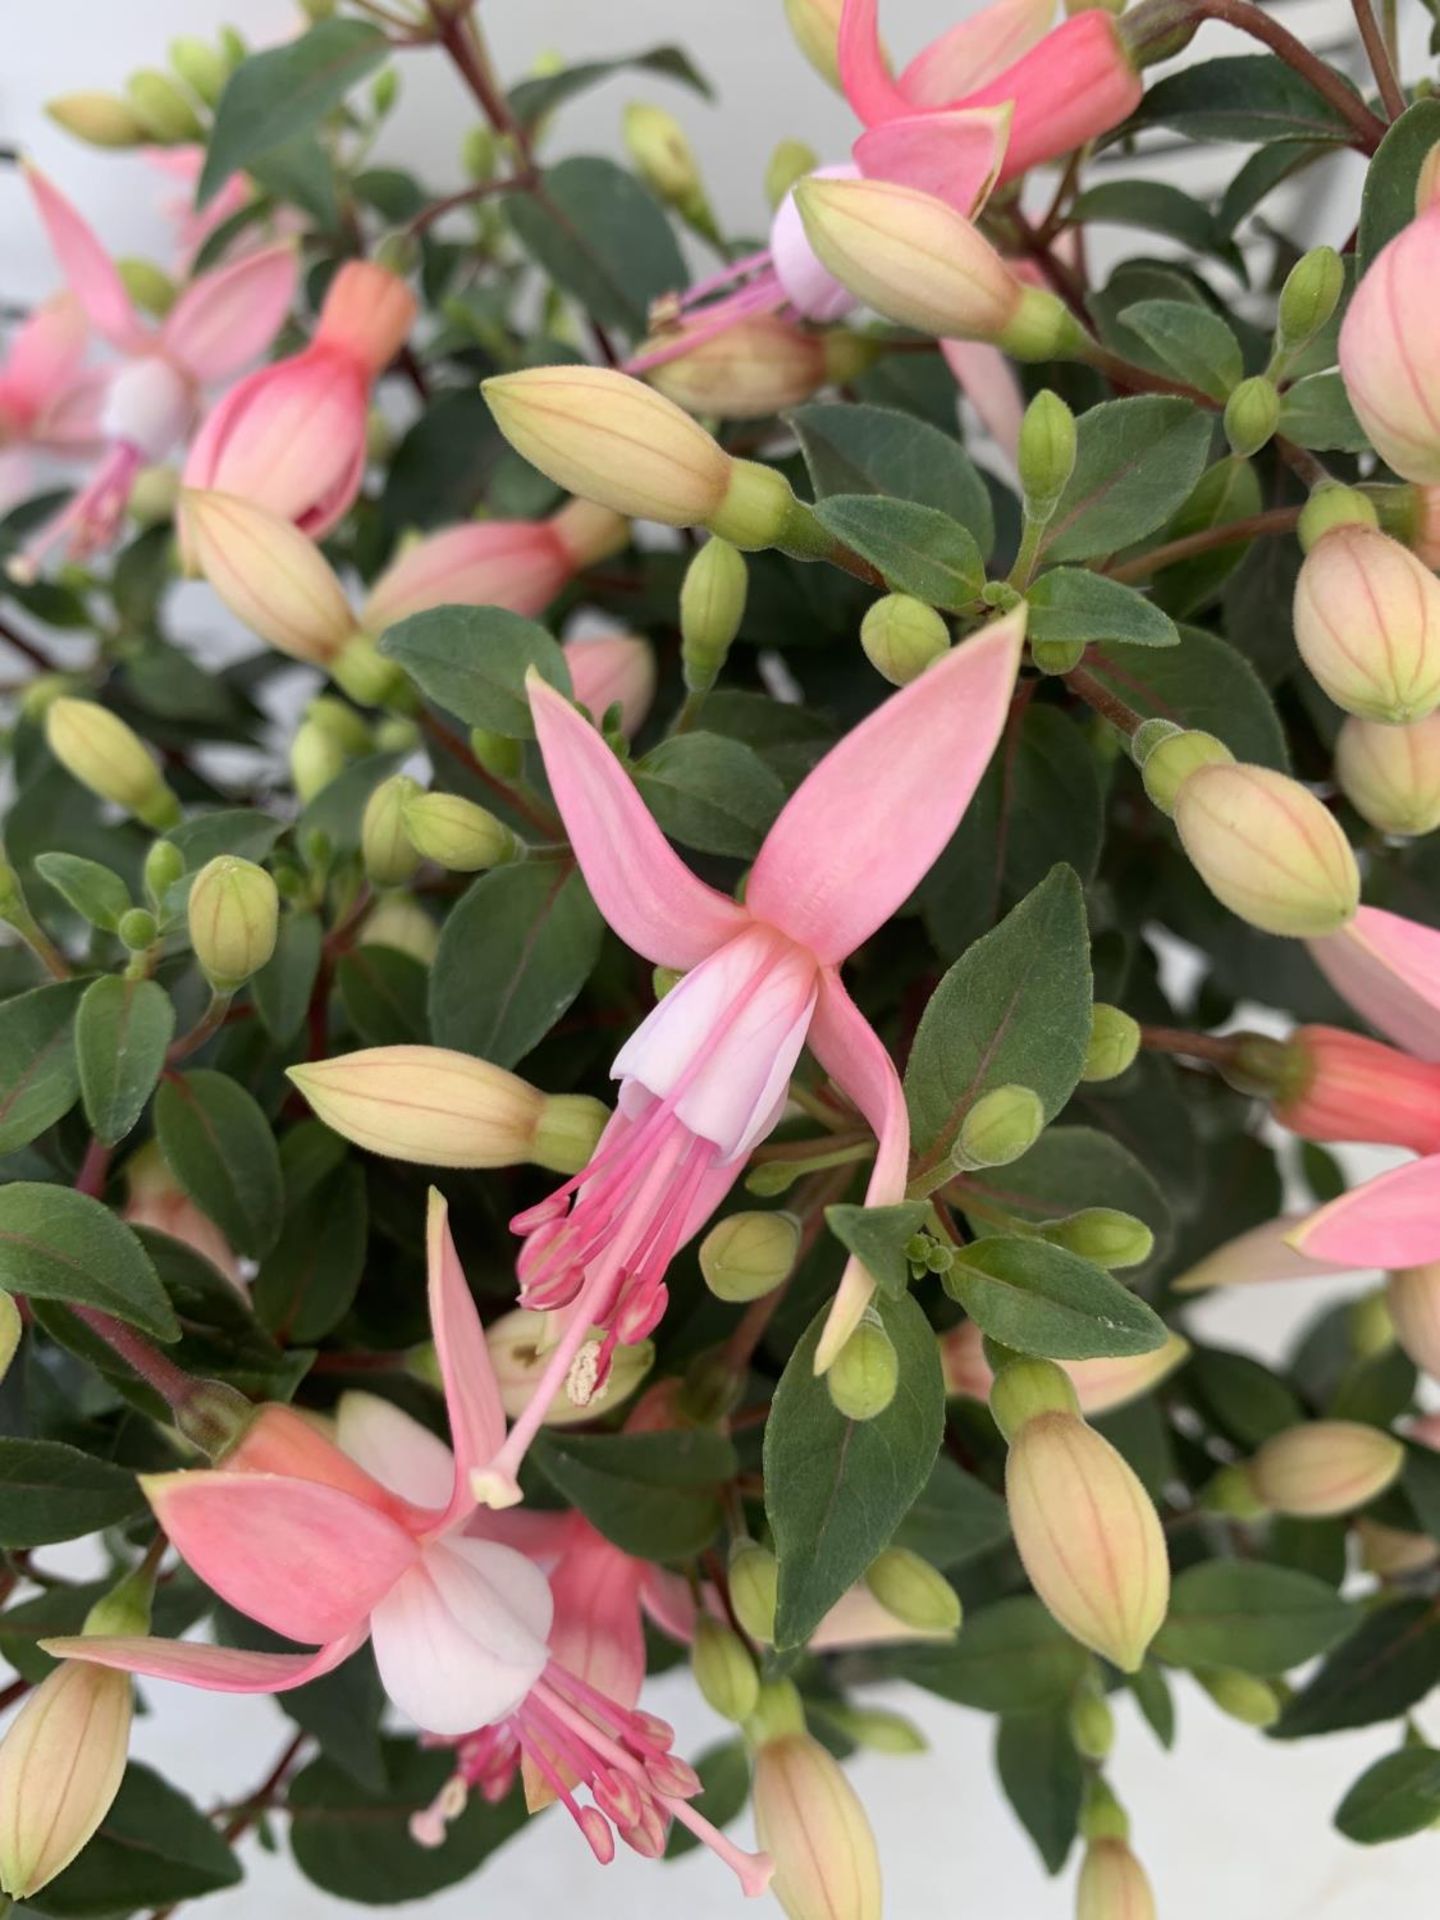 NINE FUCHSIA BELLA PINK IN 20CM POTS 20-30CM TALL TO BE SOLD FOR THE NINE PLUS VAT - Image 4 of 6